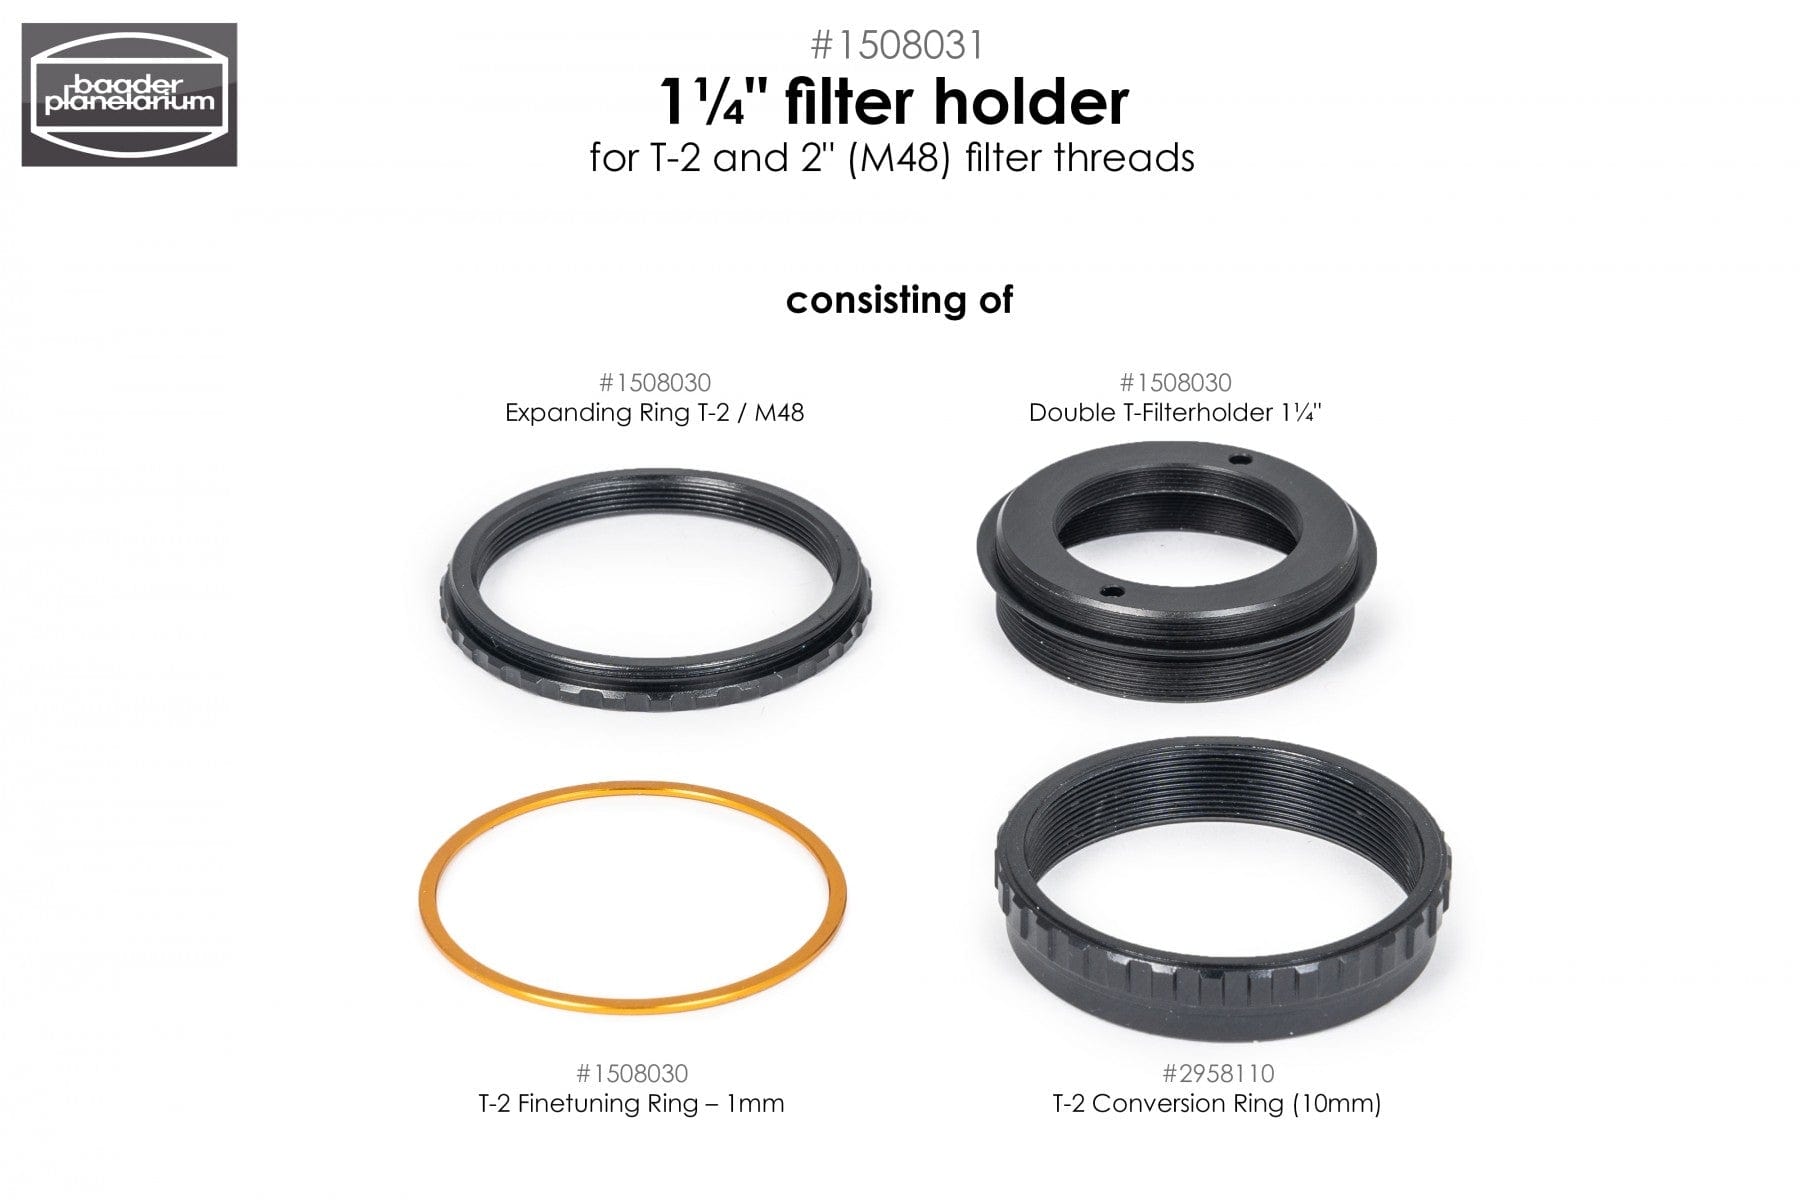 Baader Planetarium Accessory 1¼"-Filterholder for T-2 and 2" filter threads